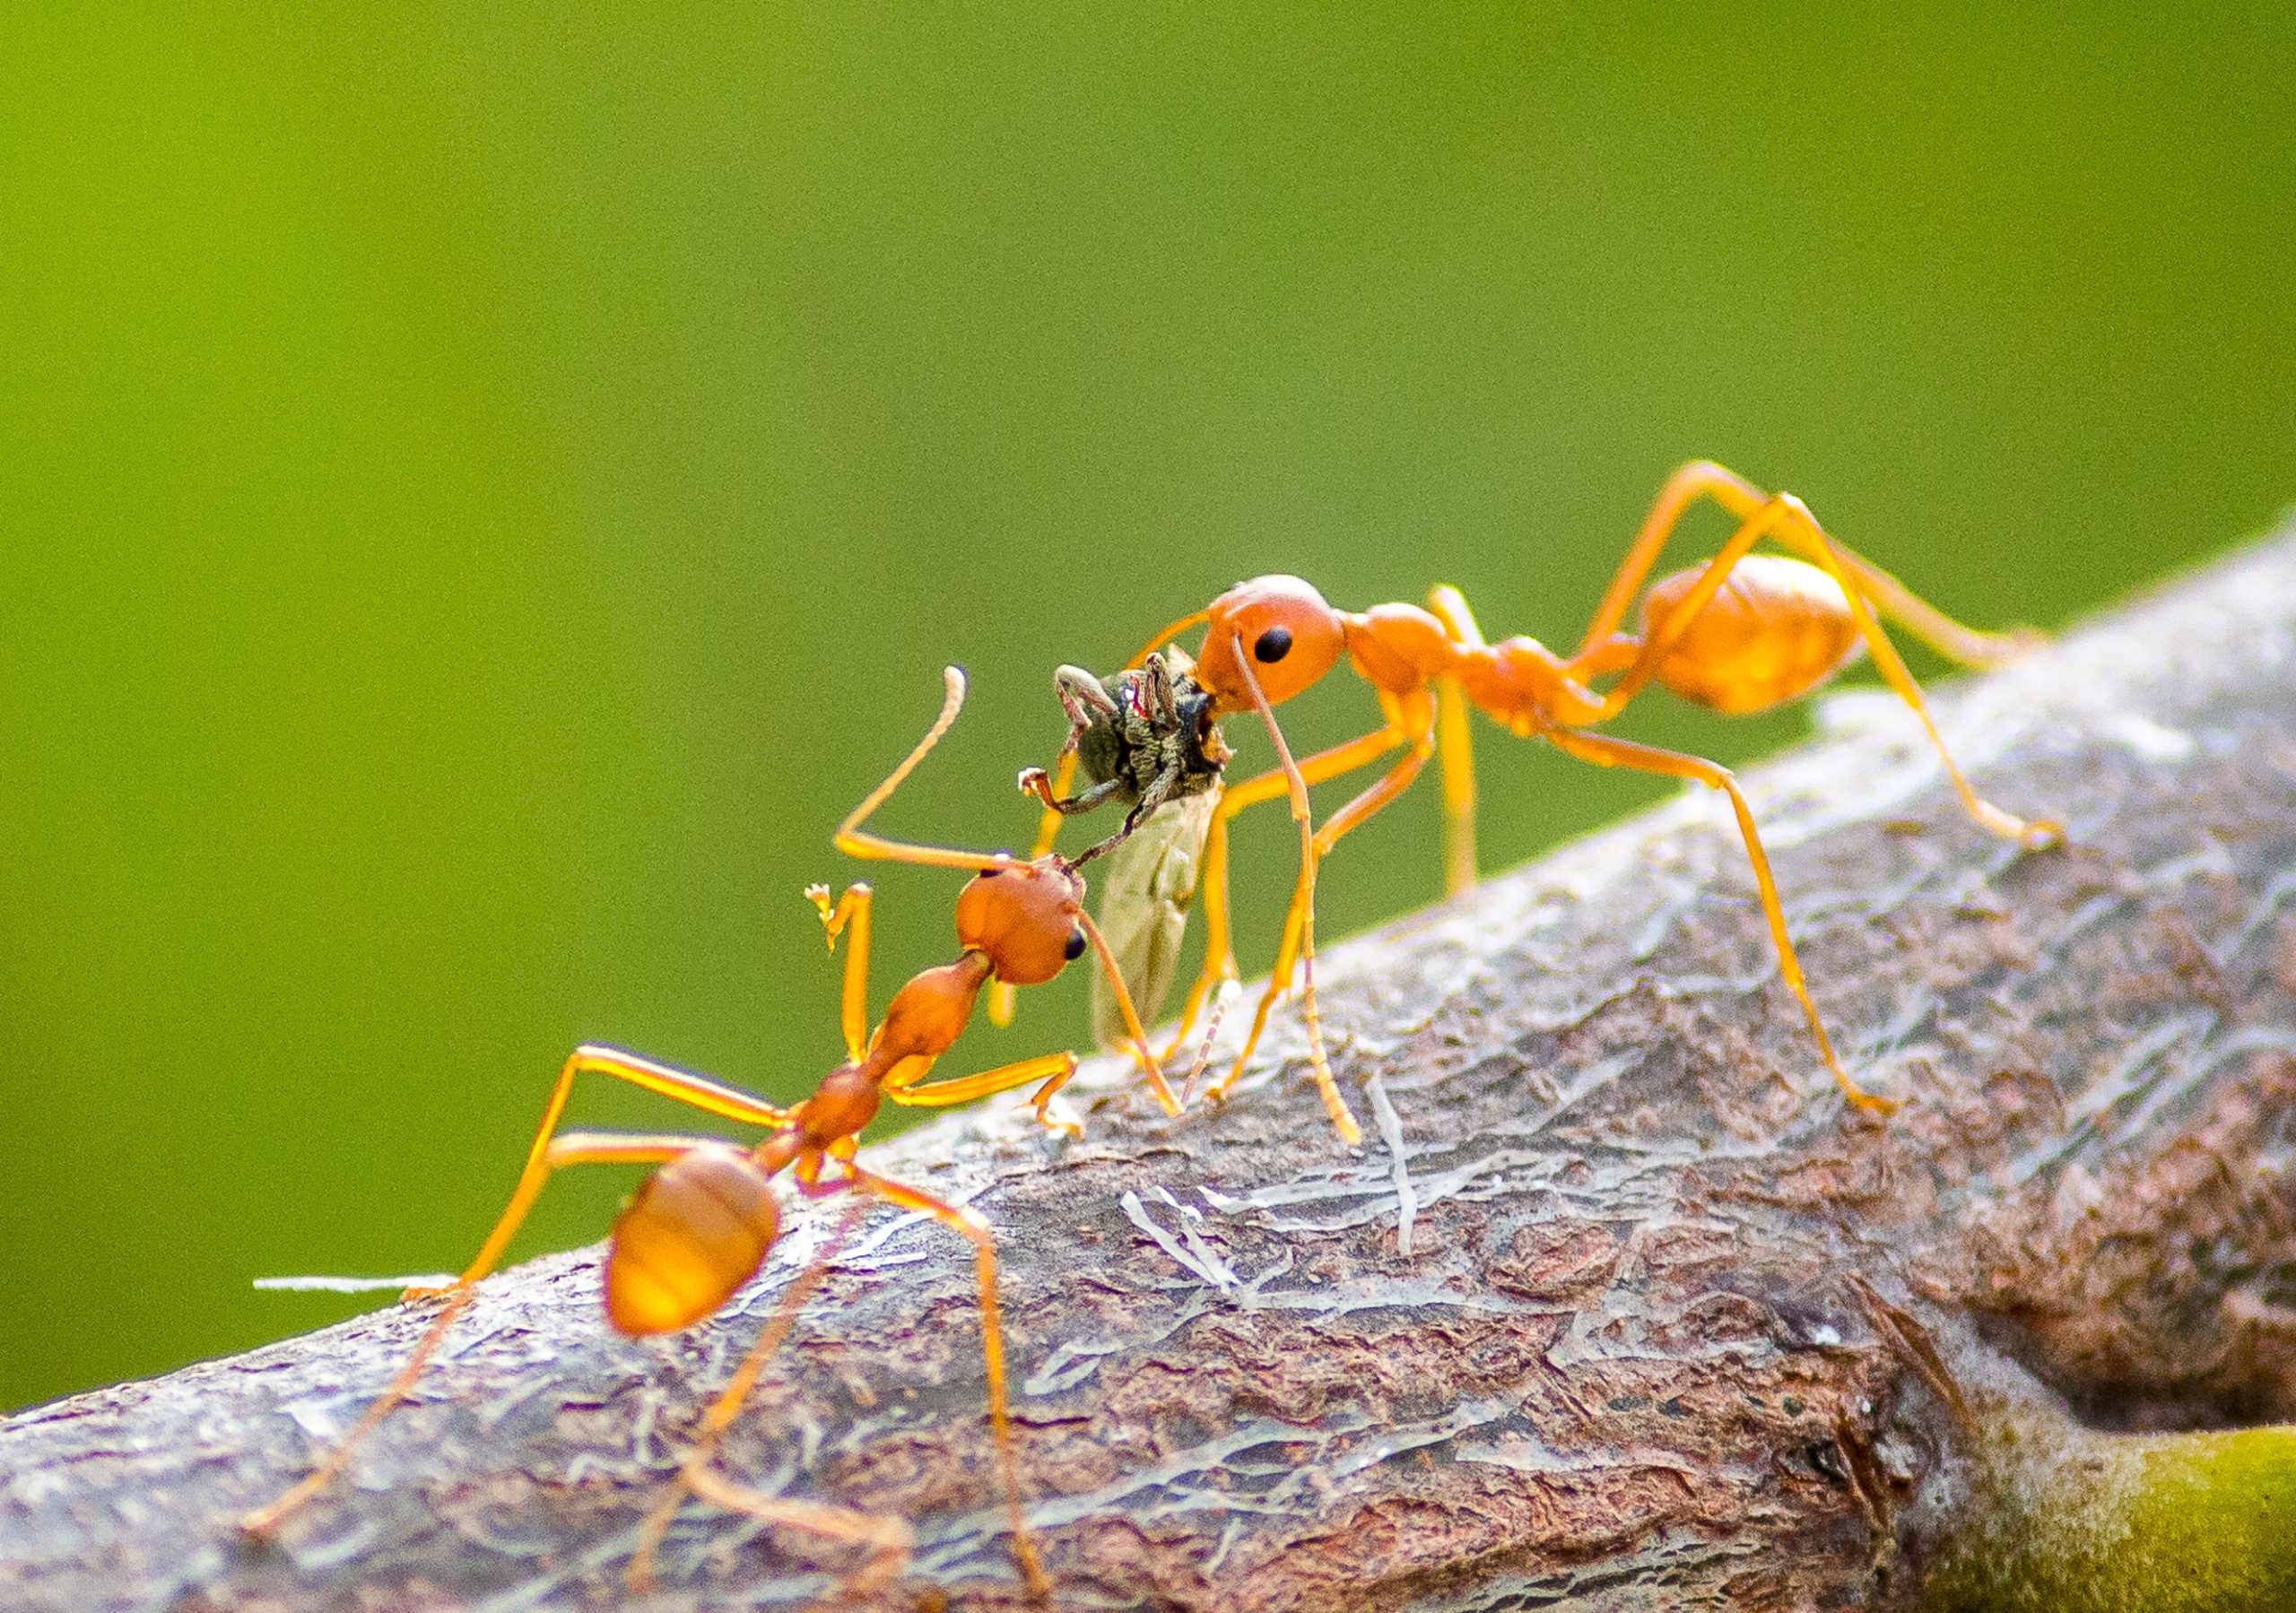 Ants fight for prey